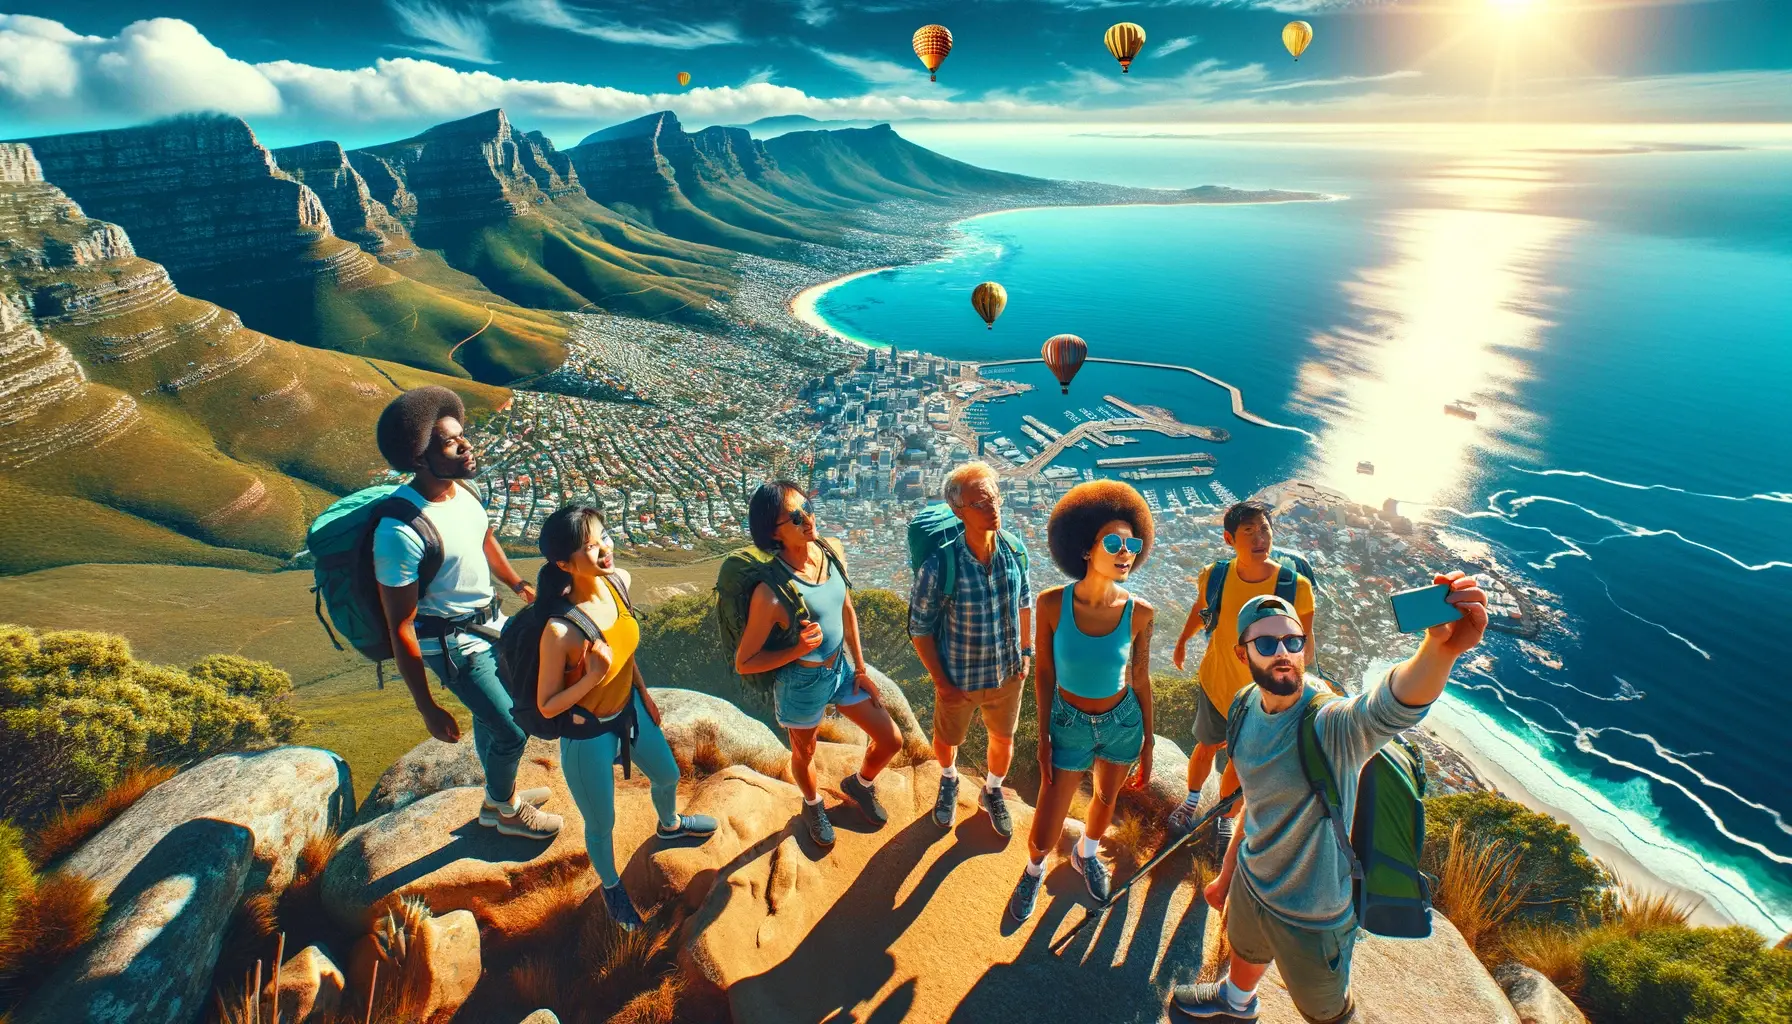 A stunning and adventurous image of Lion's Head in Cape Town